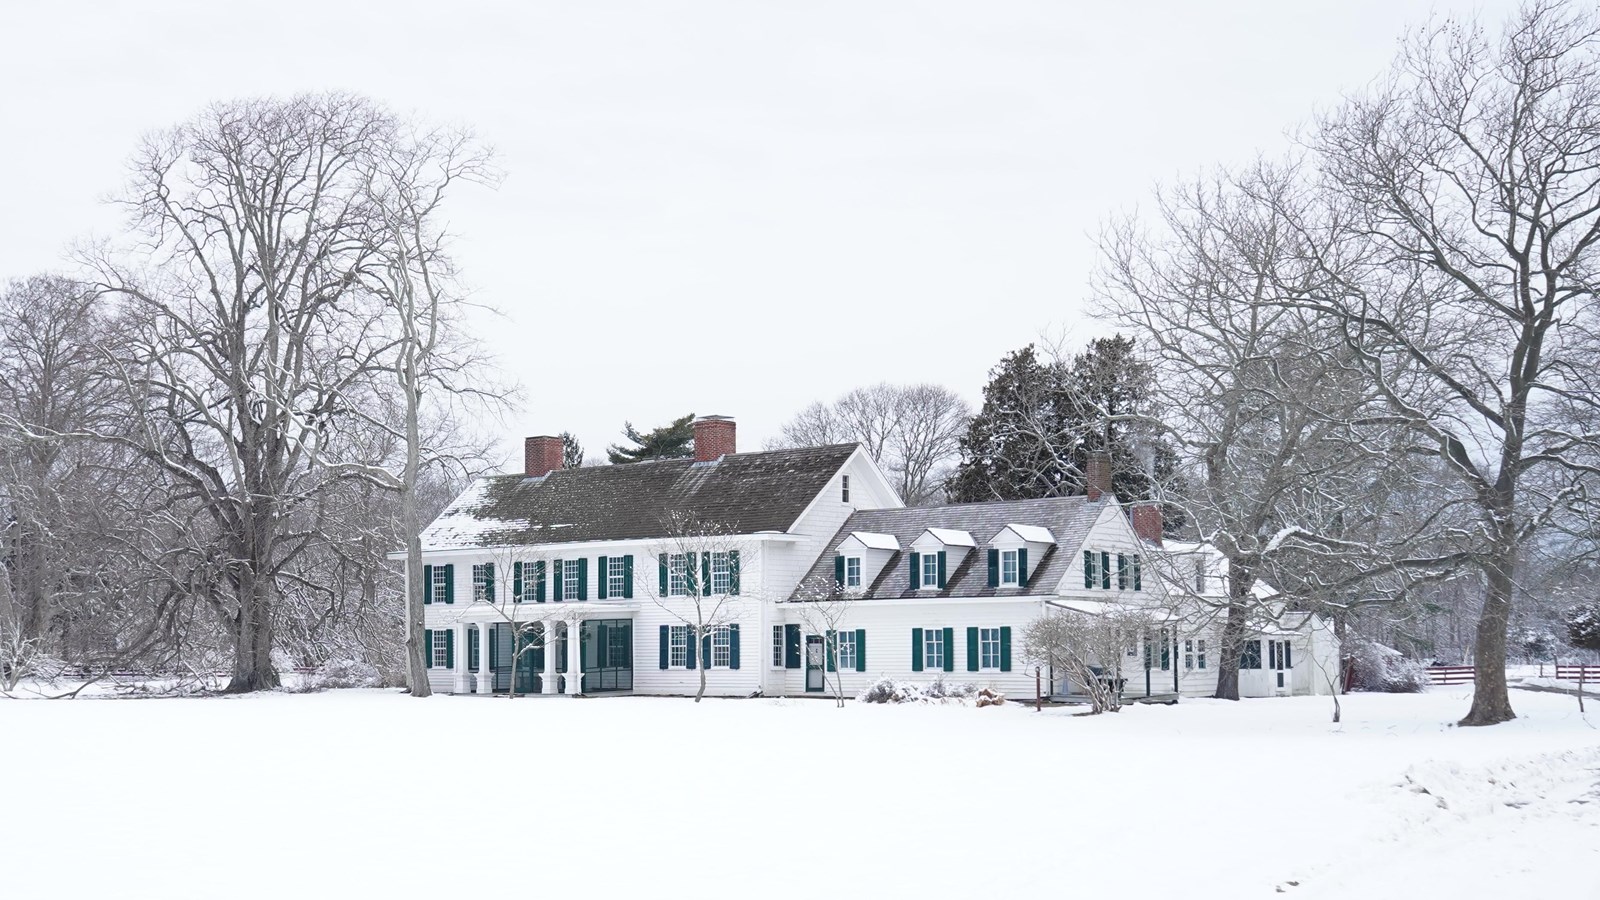 A white colonial estate with green shutters is surrounded by trees and snow.